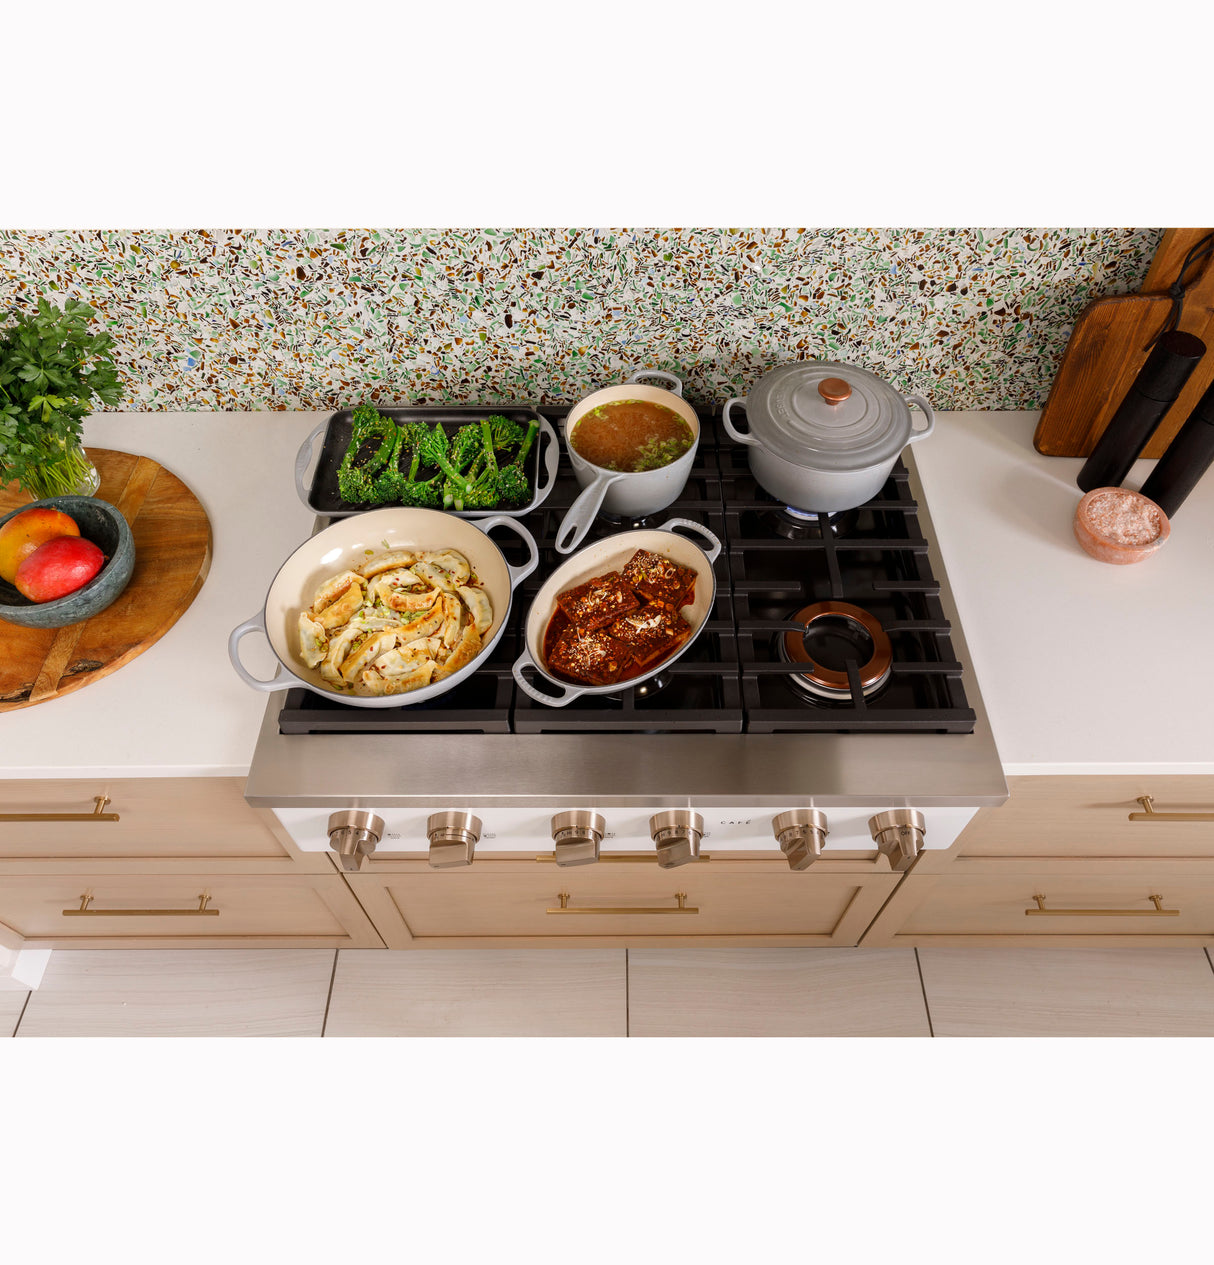 Caf(eback)(TM) 36" Commercial-Style Gas Rangetop with 6 Burners (Natural Gas) - (CGU366P4TW2)